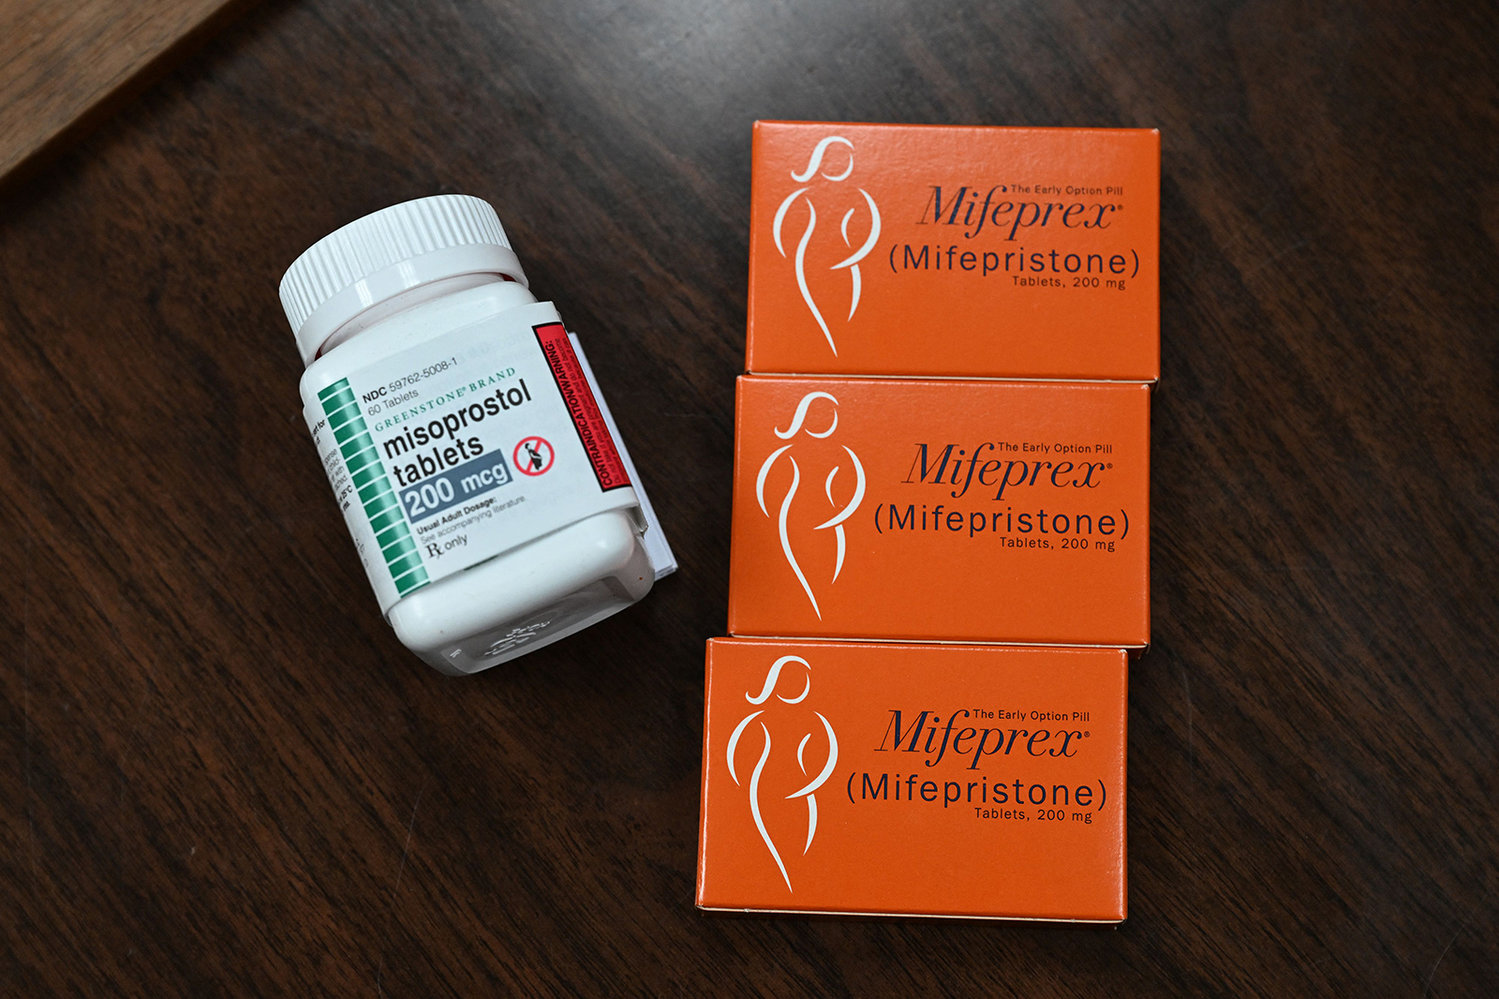 Mifepristone (Mifeprex) and Misoprostol, the two drugs used in a medication abortion, are seen at the Women's Reproductive Clinic, which provides legal medication abortion services, in Santa Teresa, New Mexico, on June 17, 2022. Mifepristone is taken first to stop the pregnancy, followed by Misoprostol to induce bleeding. (Robyn Beck/AFP via Getty Images/TNS)